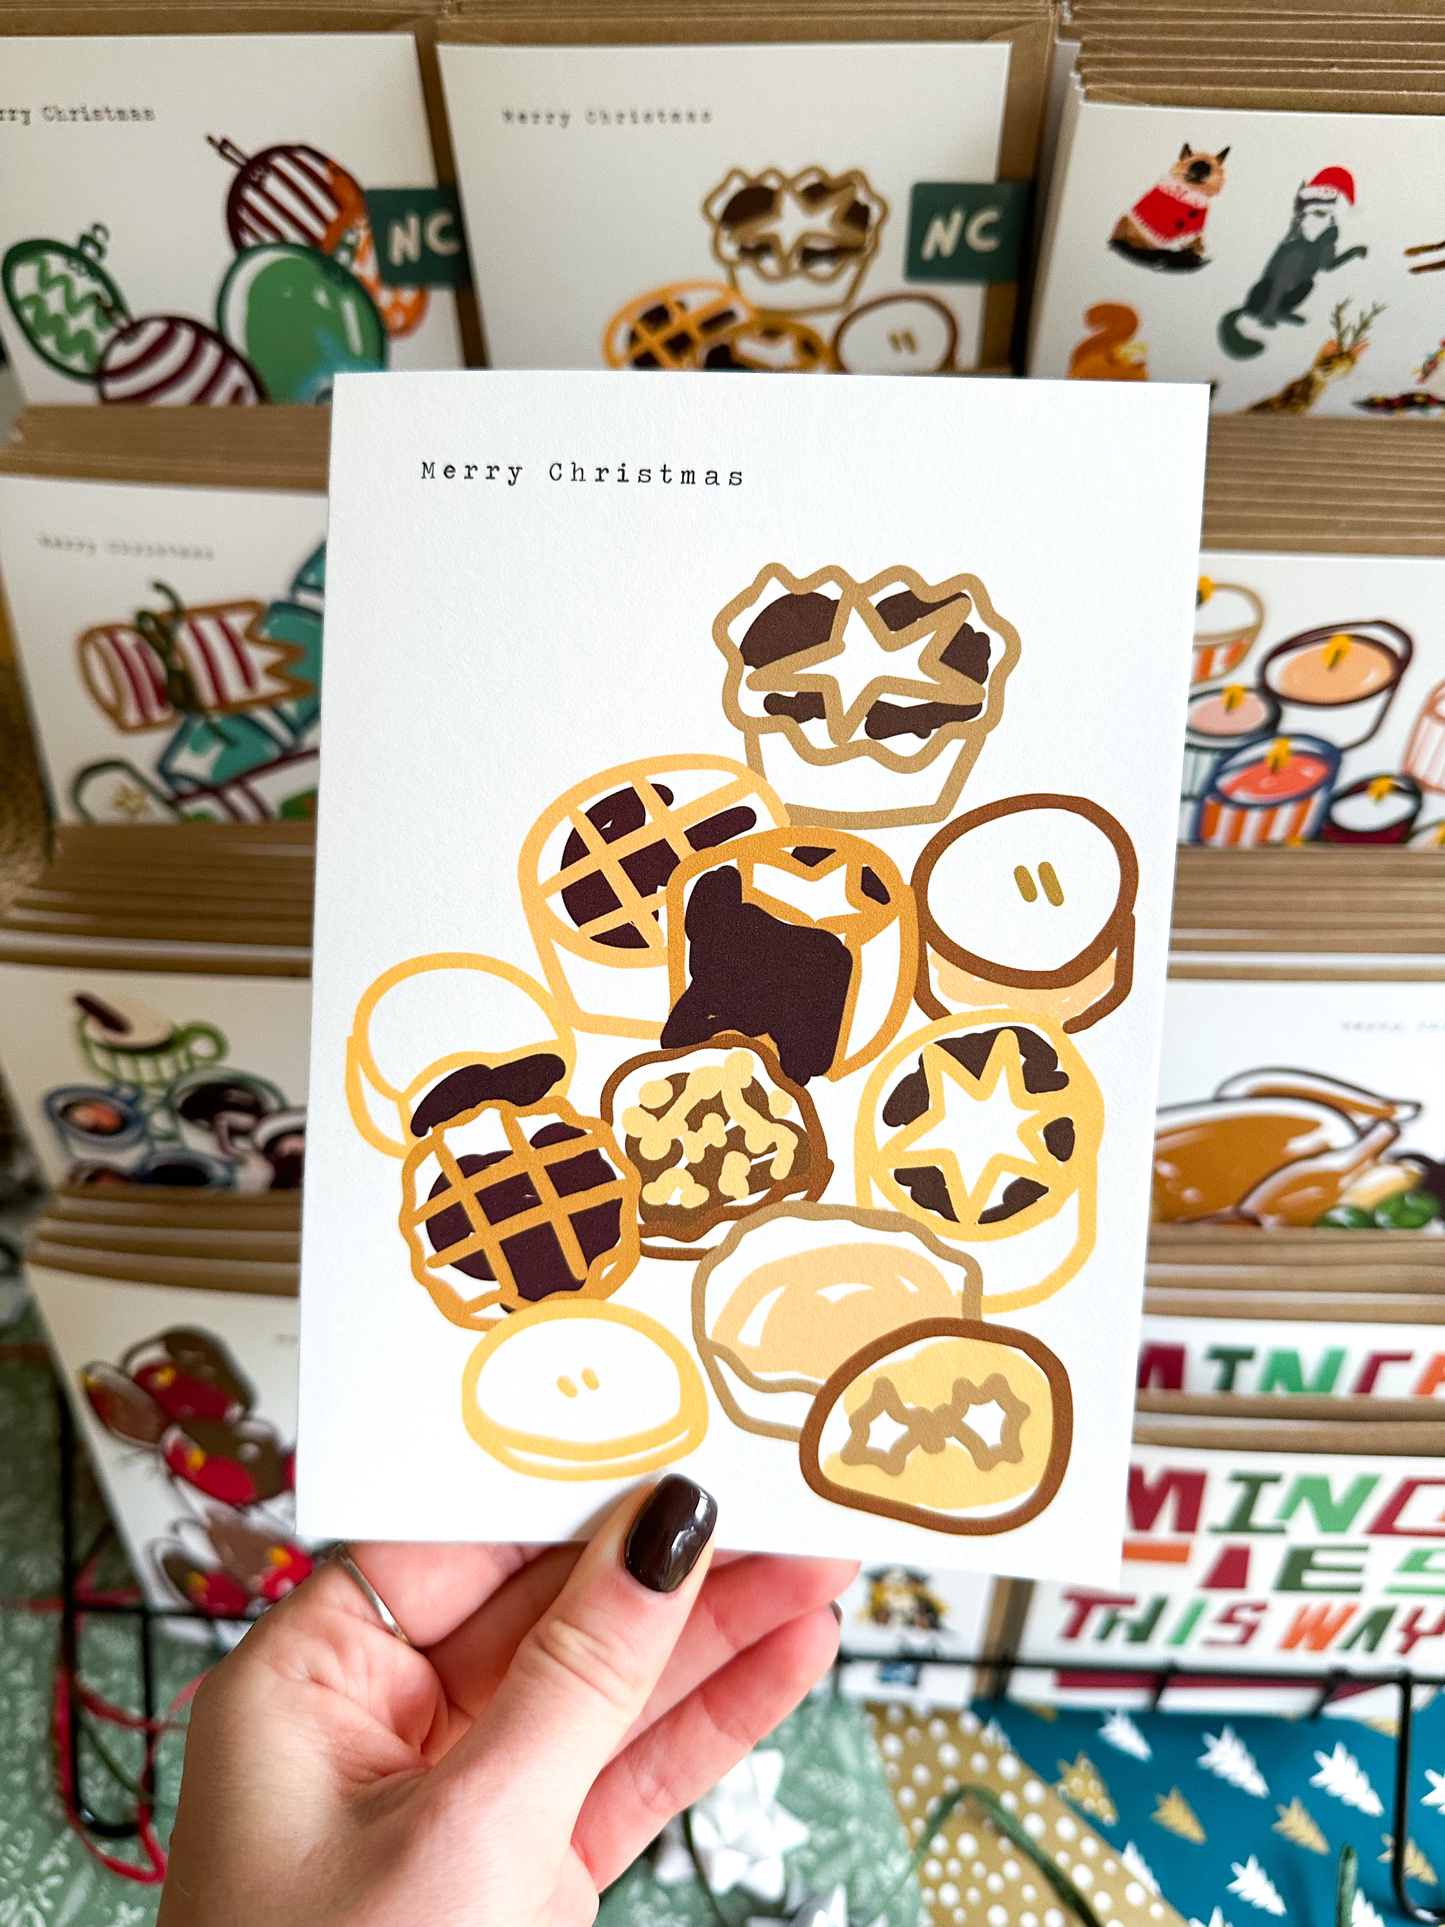 Mince Pies Christmas Card / Festive Greeting Card / Hand Drawn Christmas Card / Christmas Card